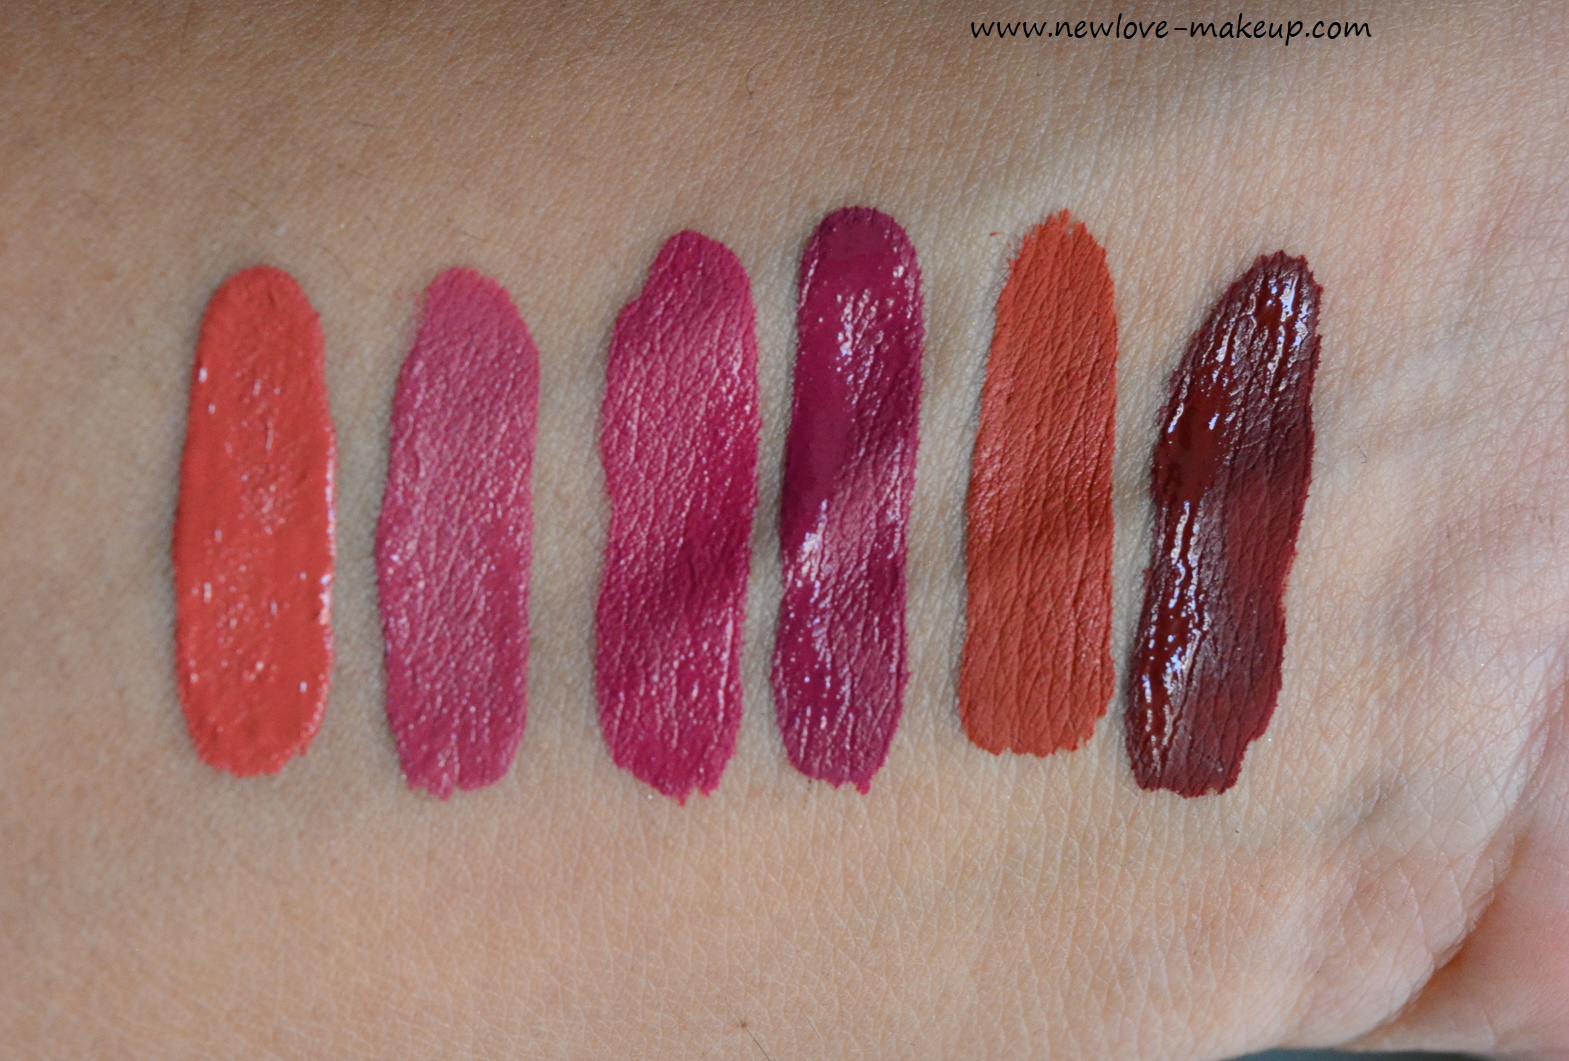 Swatches - New Shades 37 to 42 in Sugar Smudge Me Not Liquid Lipsticks